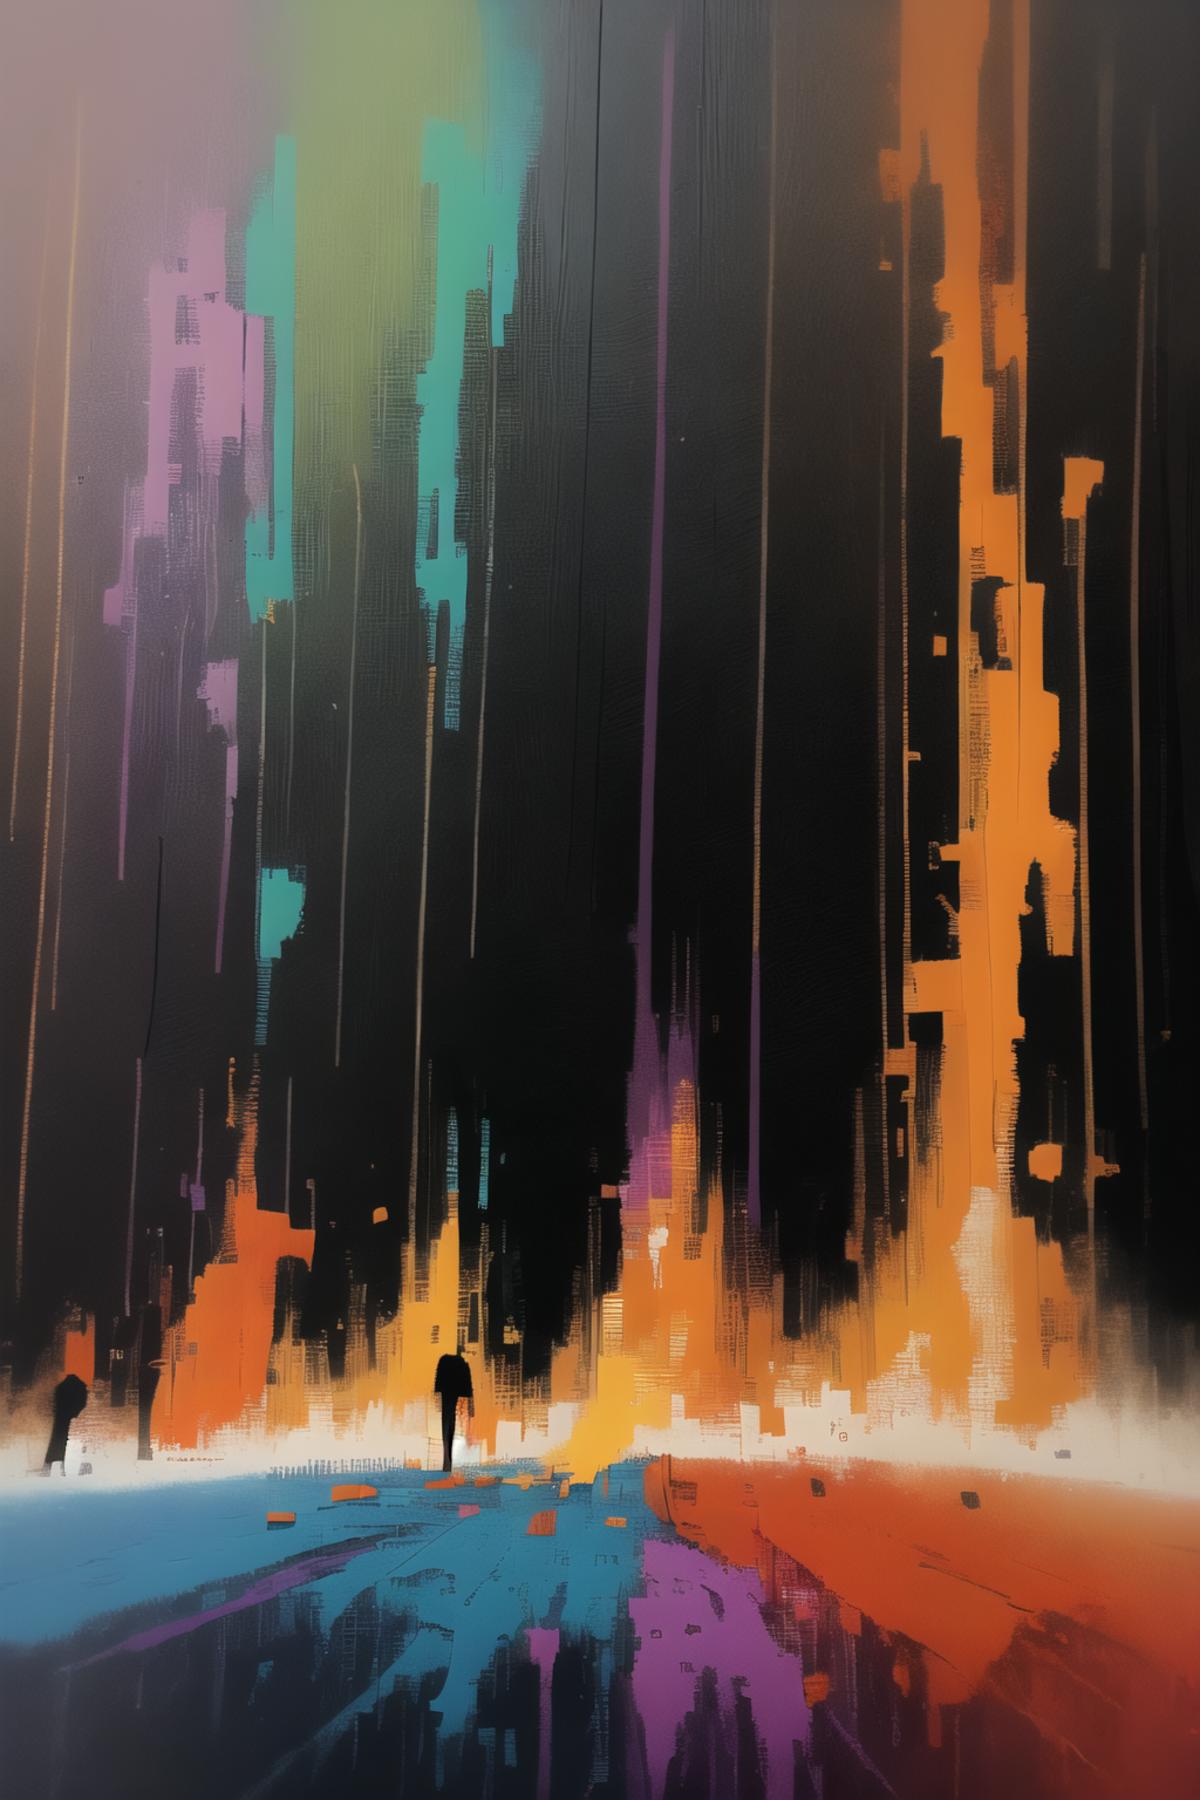 A painting of a group of people walking in a dark and colorful environment.